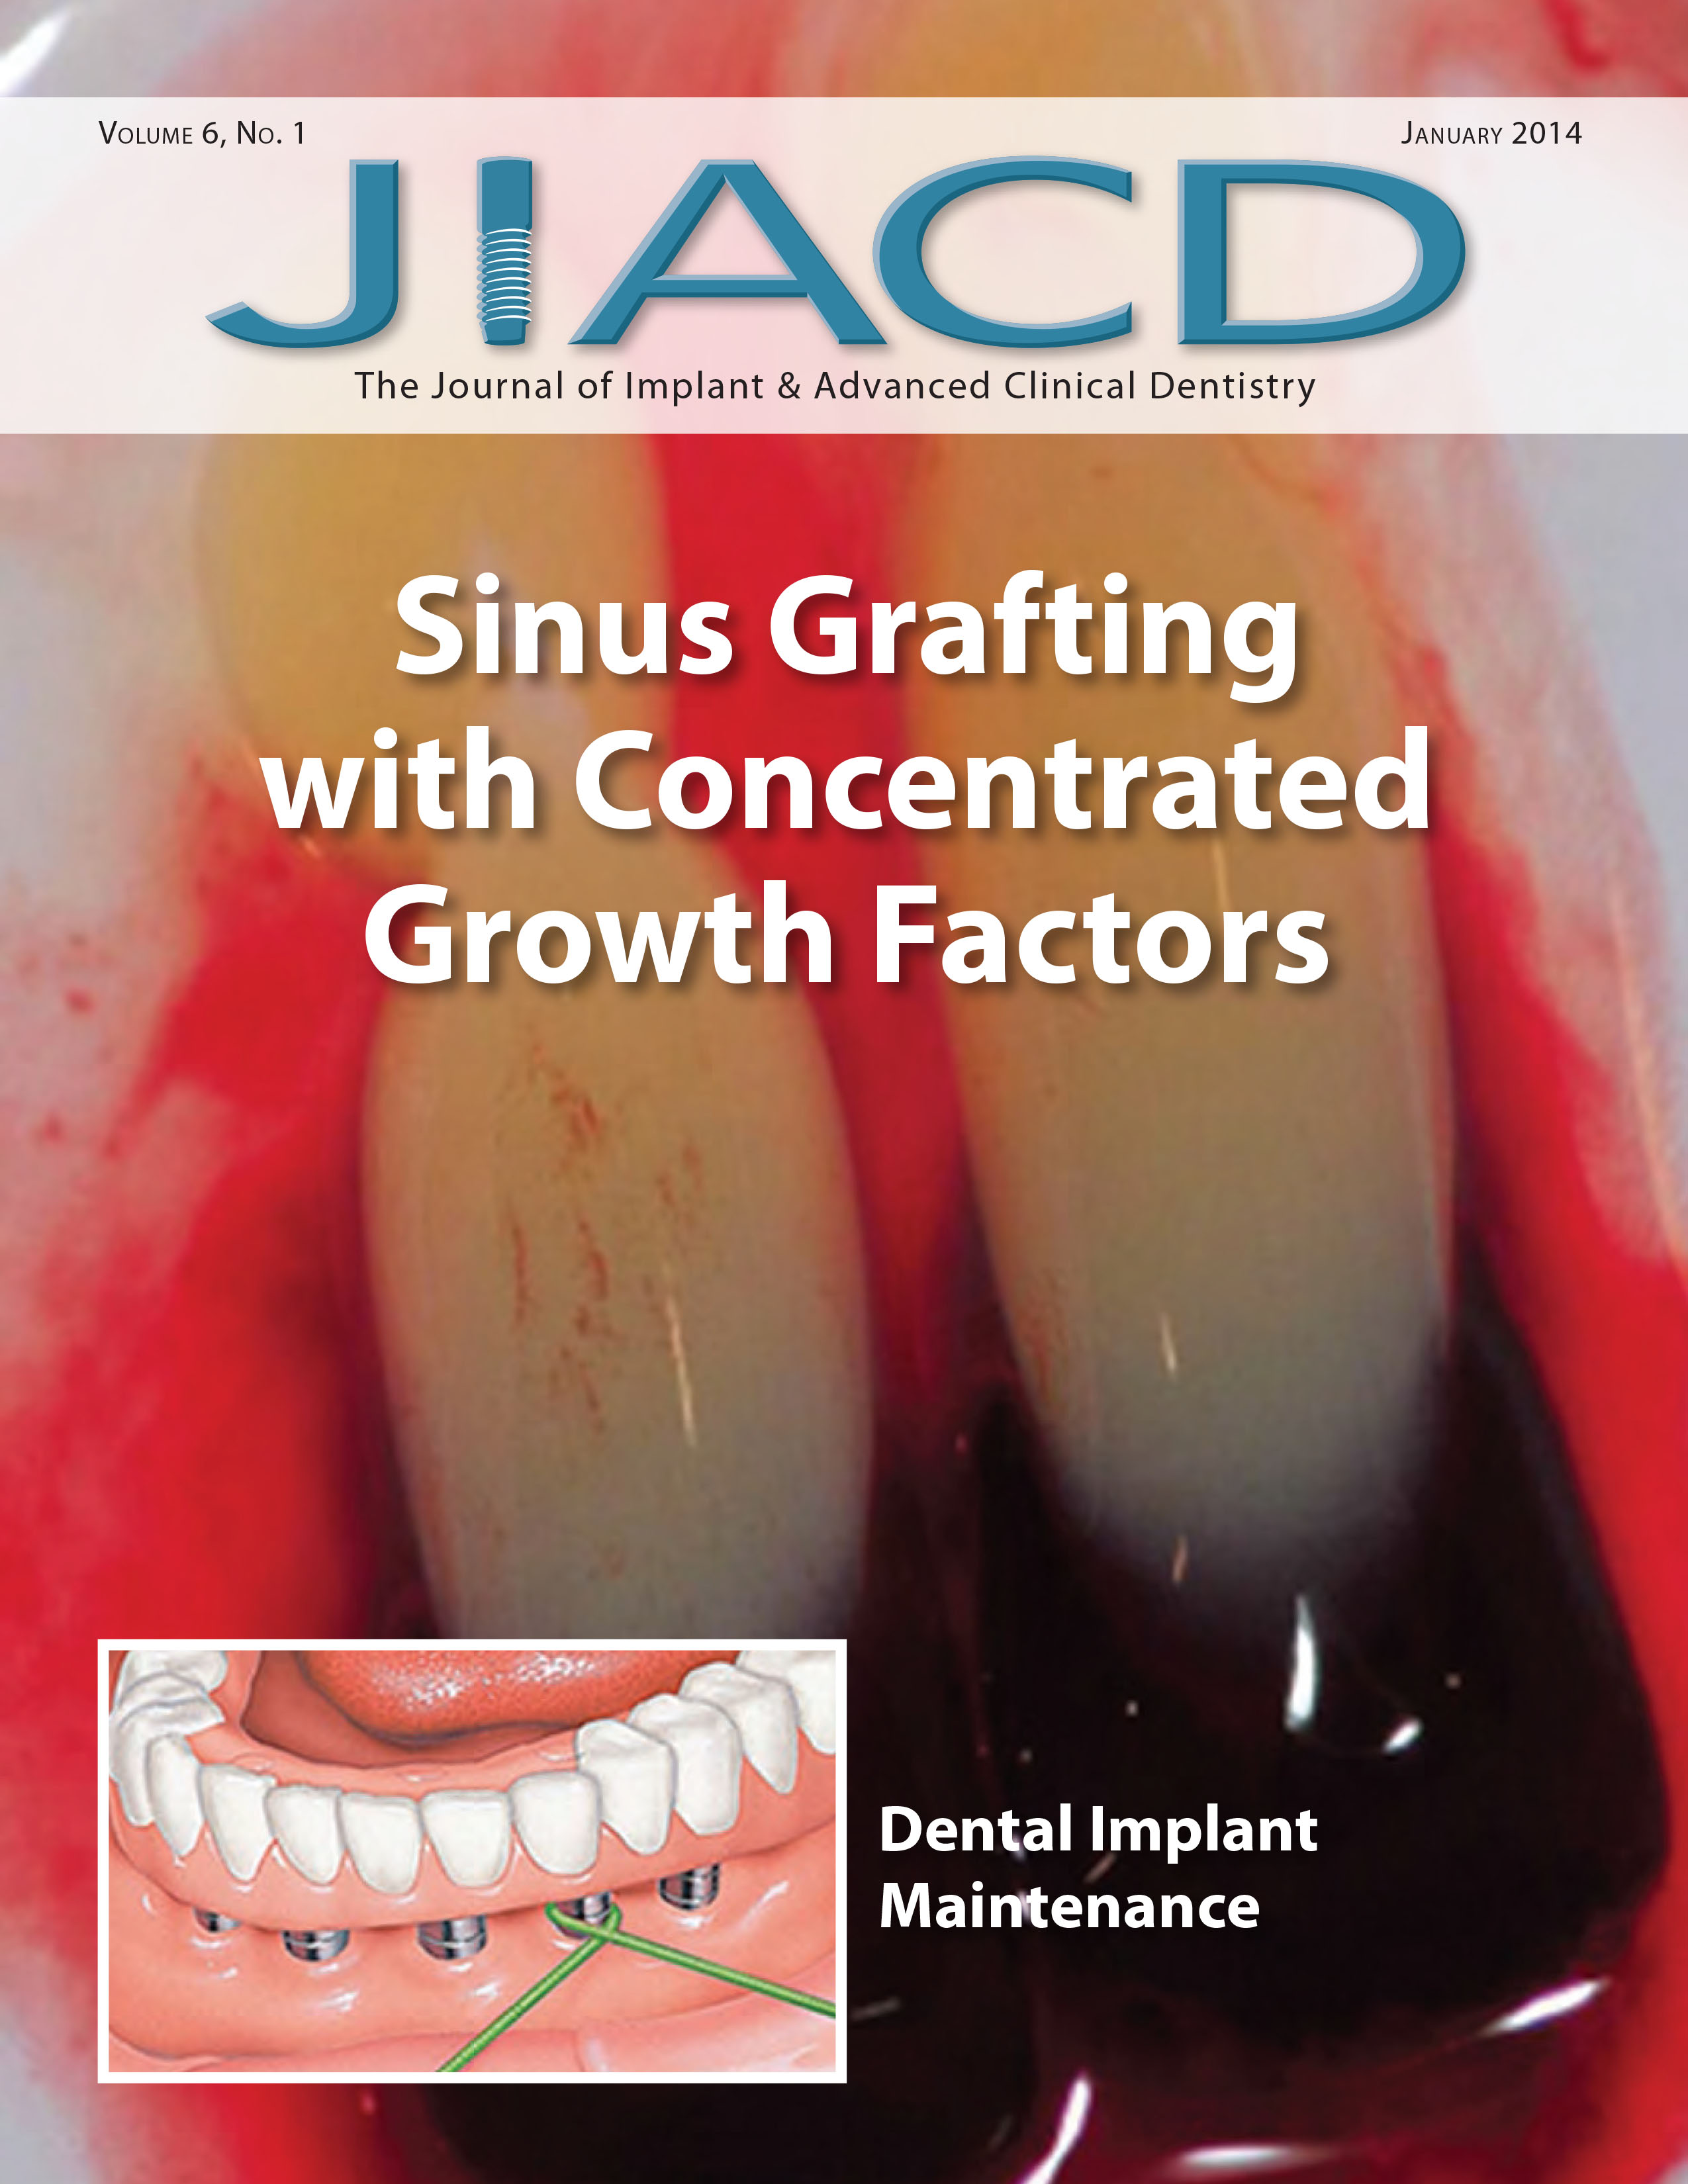 Sinus Grafting with Concentrated Growth Factors